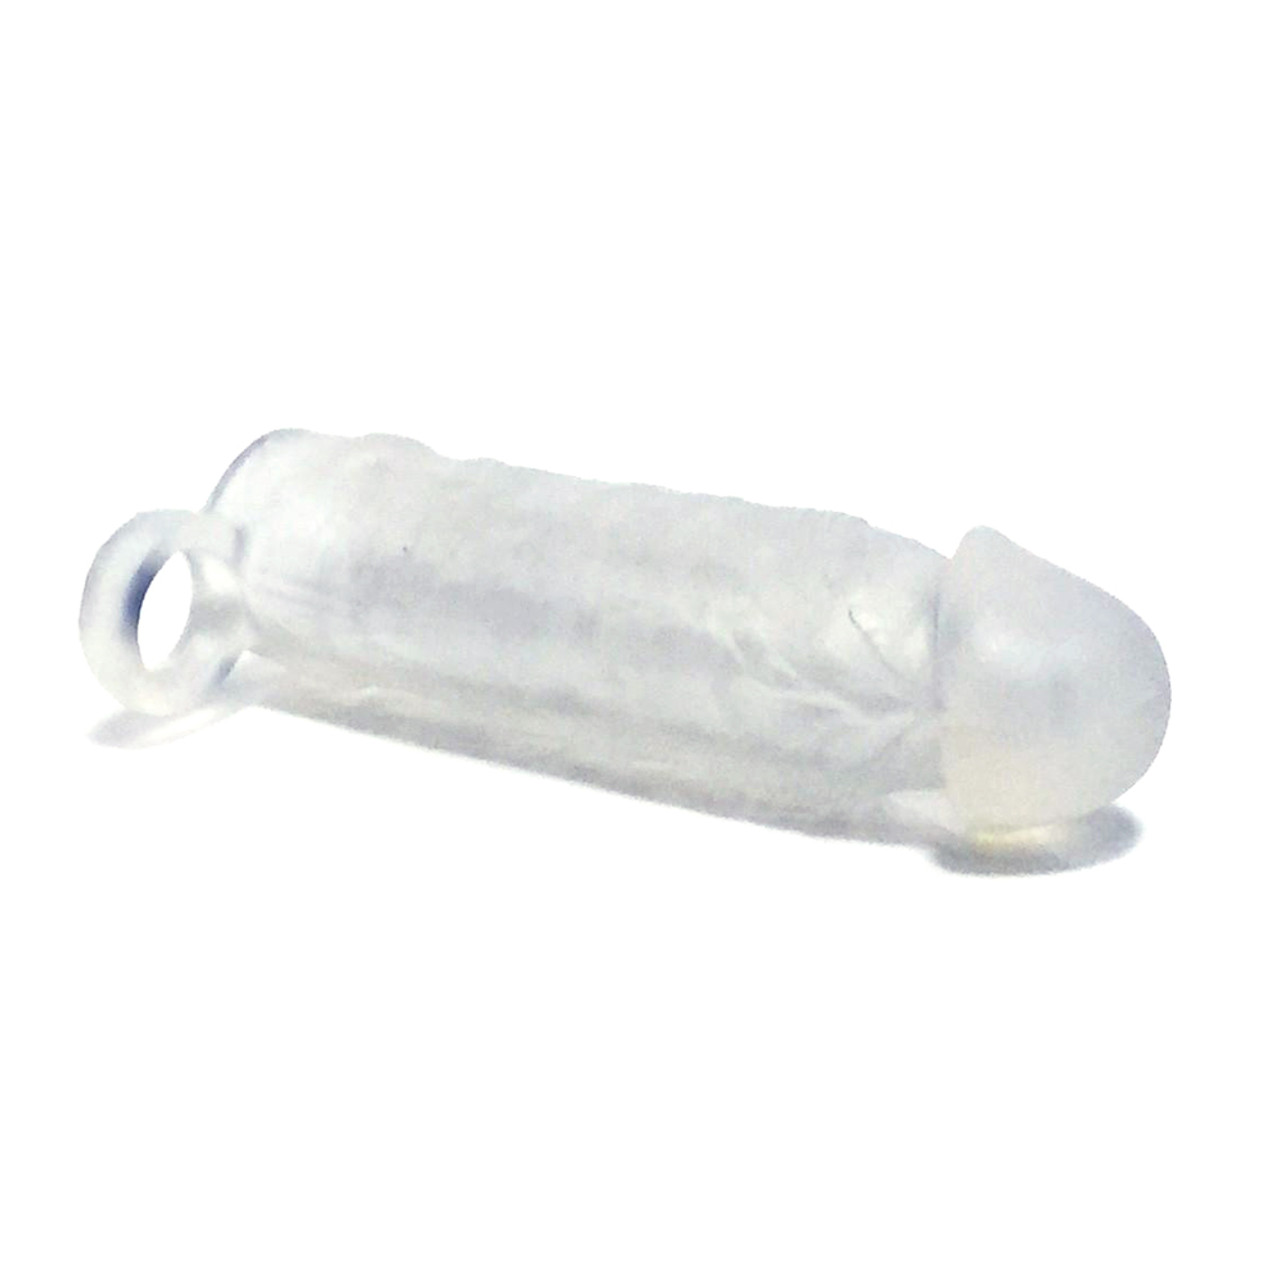 buy The Meaty 3X Stretch Realistic Silicone Penis Extender and Girth Enhancing Sleeve with Ball Strap in Clear ManSizer pic picture